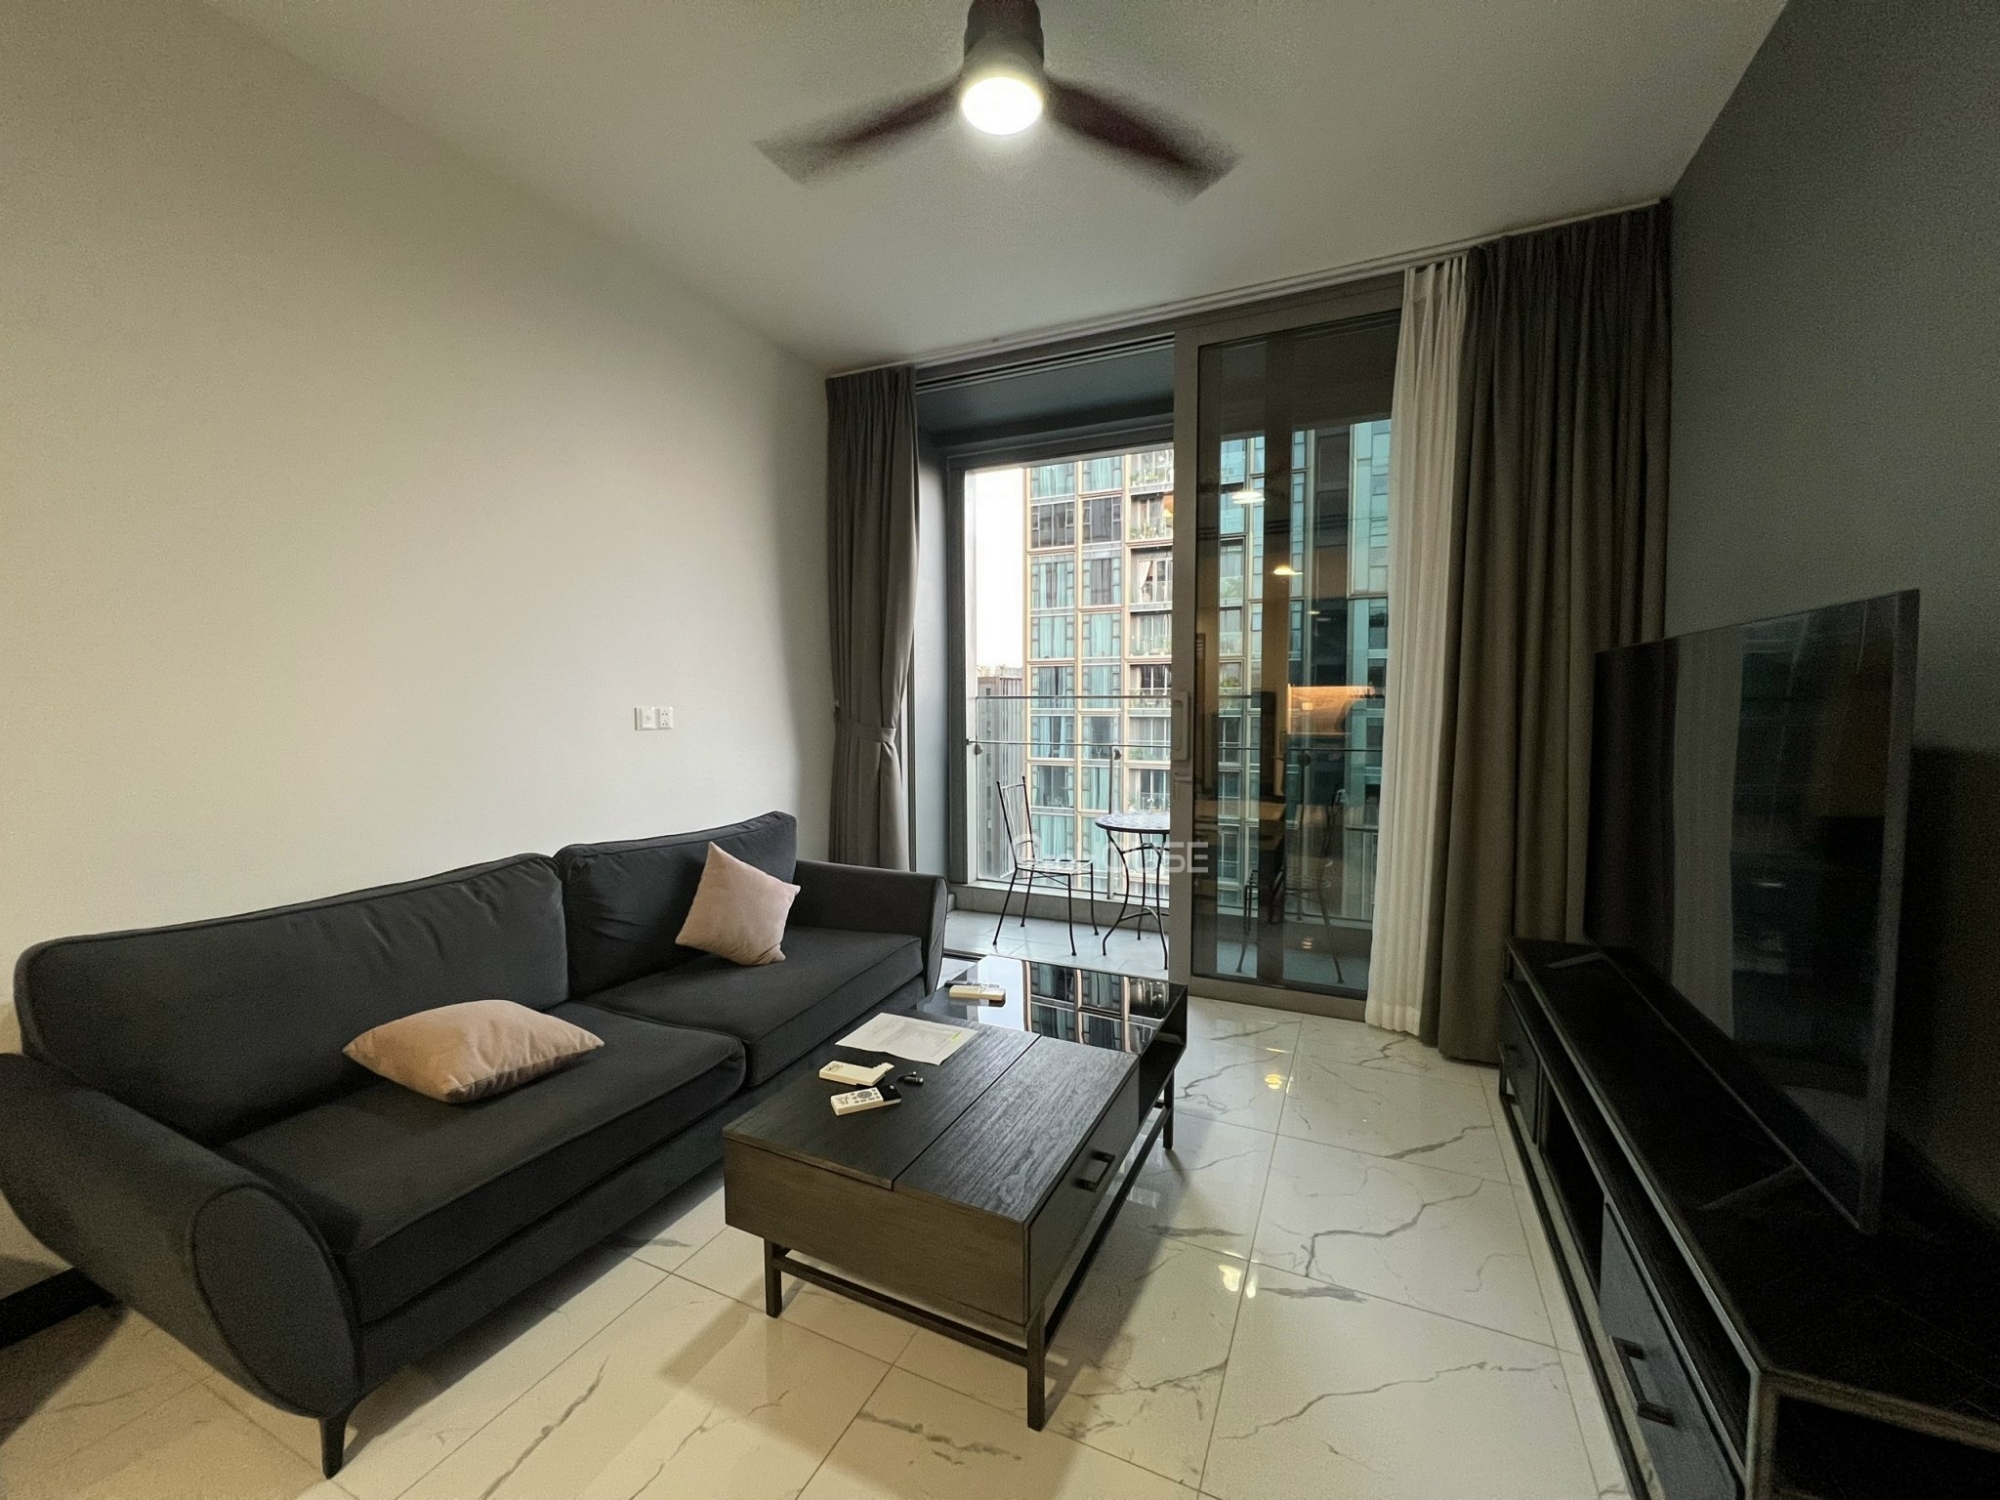 1 bedroom apartment for rent with pool view at Empire City with full furniture